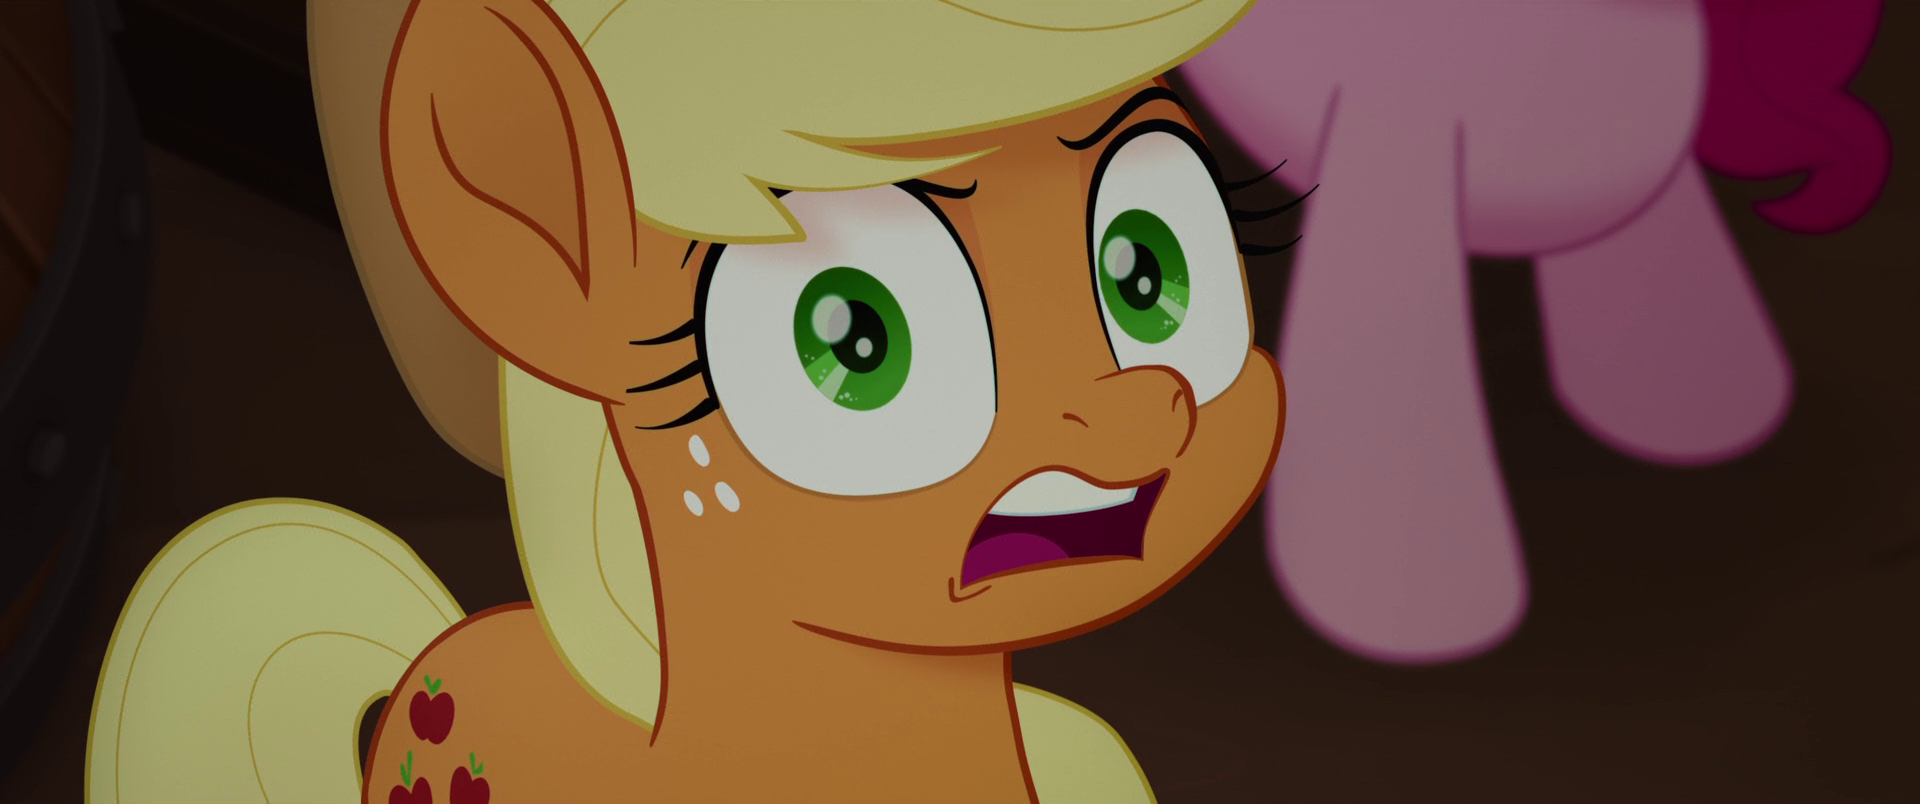 Image Applejack shocked at the thought of being tied up MLPTM.png